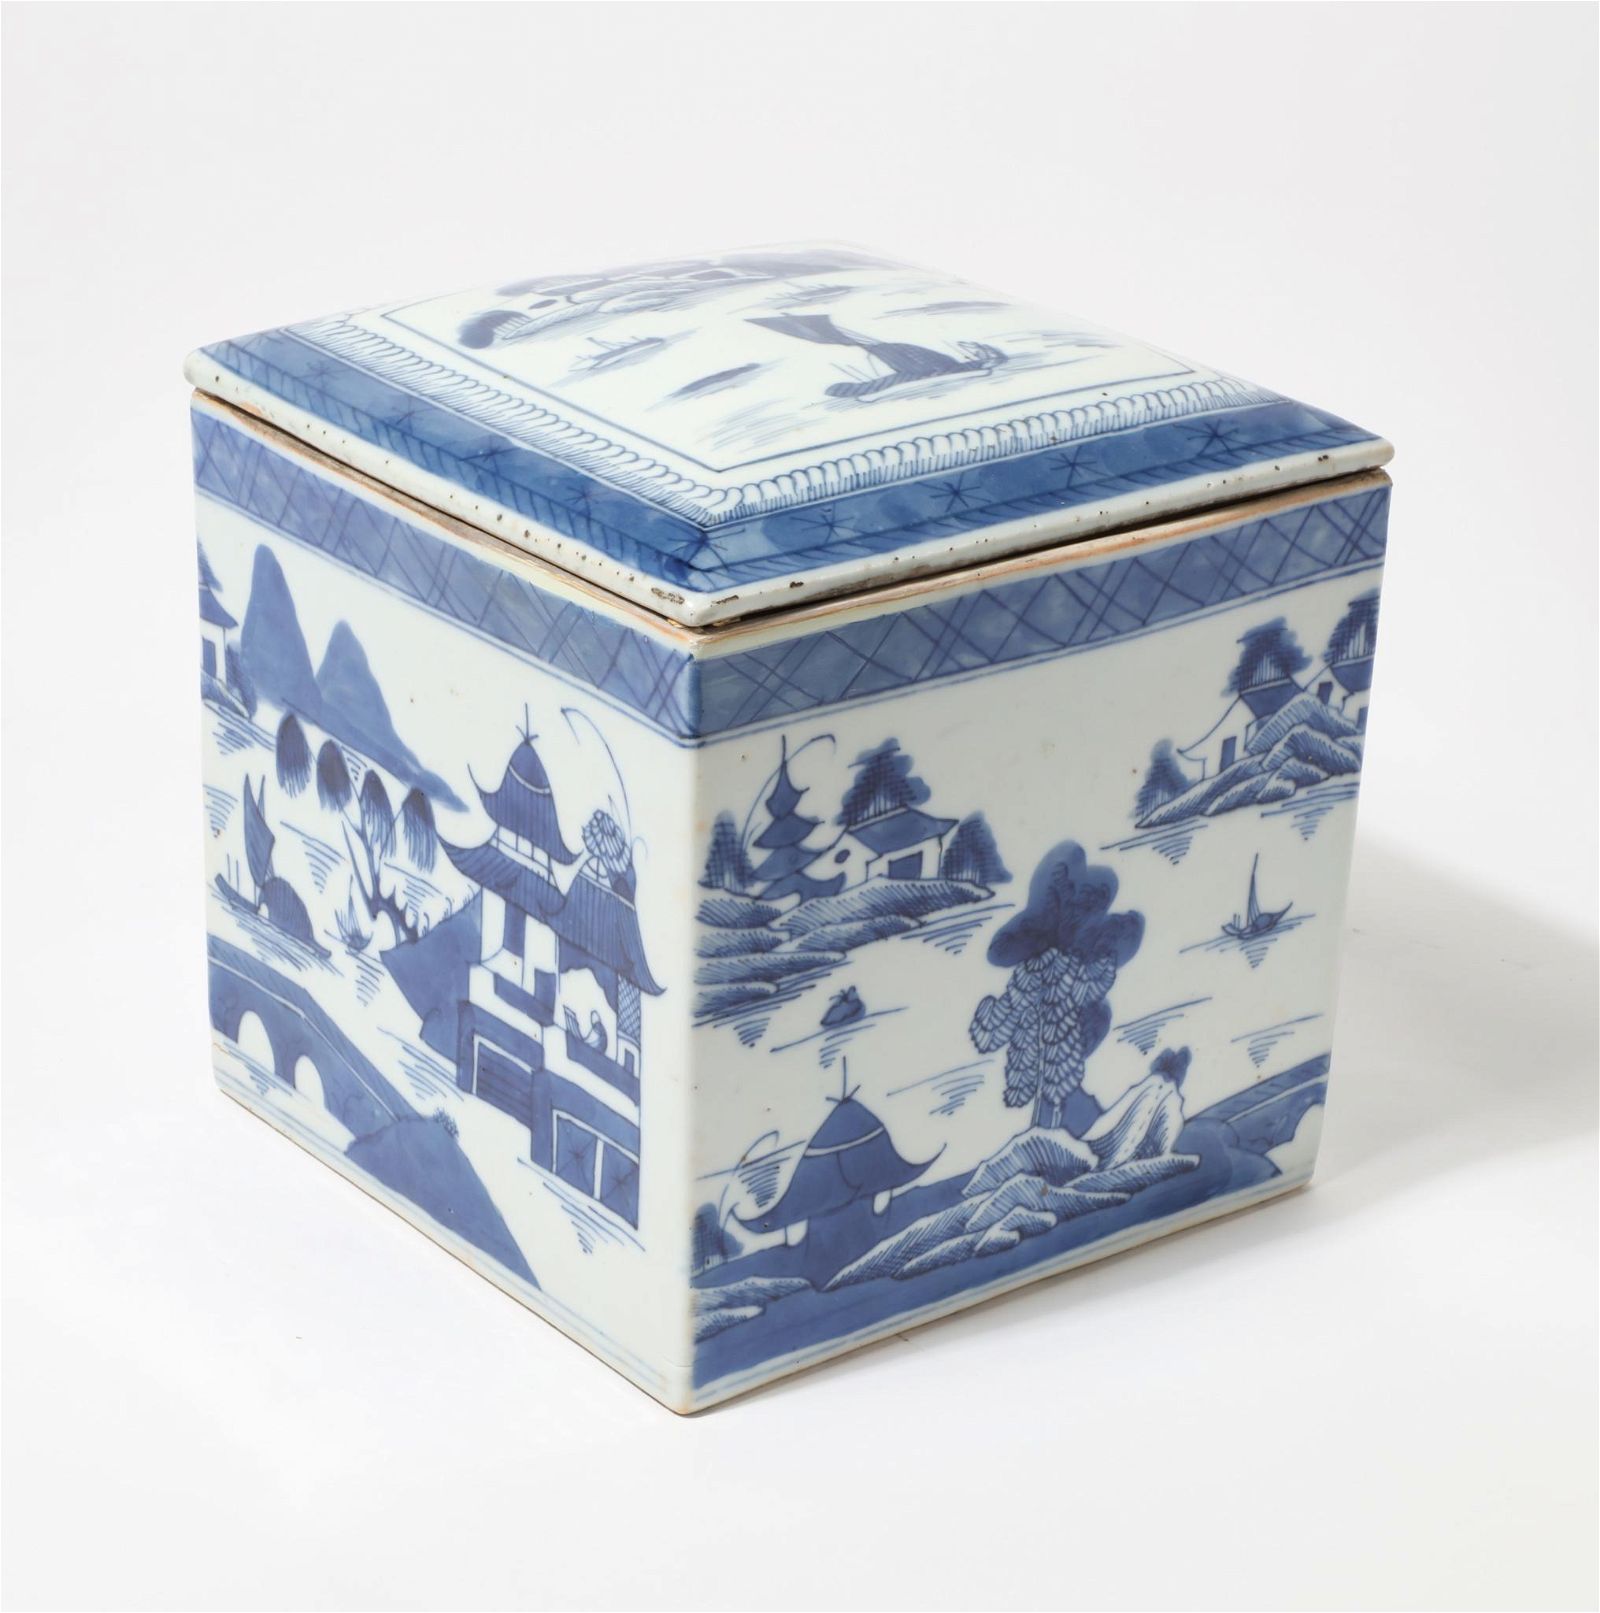 A CHINESE EXPORT BLUE AND WHITE